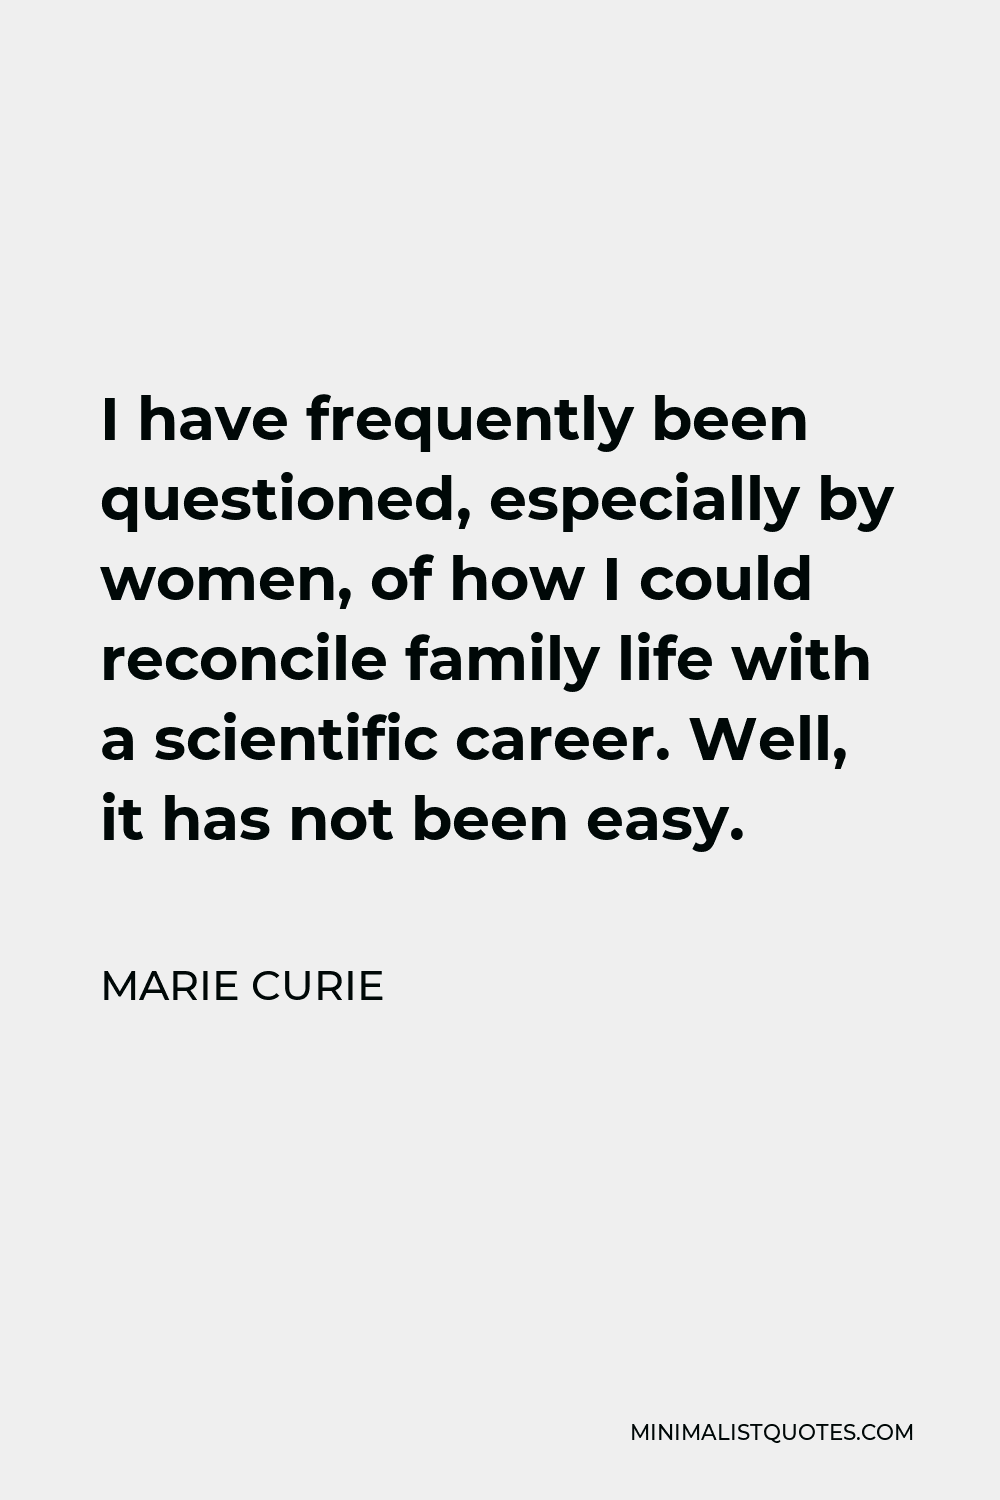 Marie Curie Quote - I have frequently been questioned, especially by women, of how I could reconcile family life with a scientific career. Well, it has not been easy.